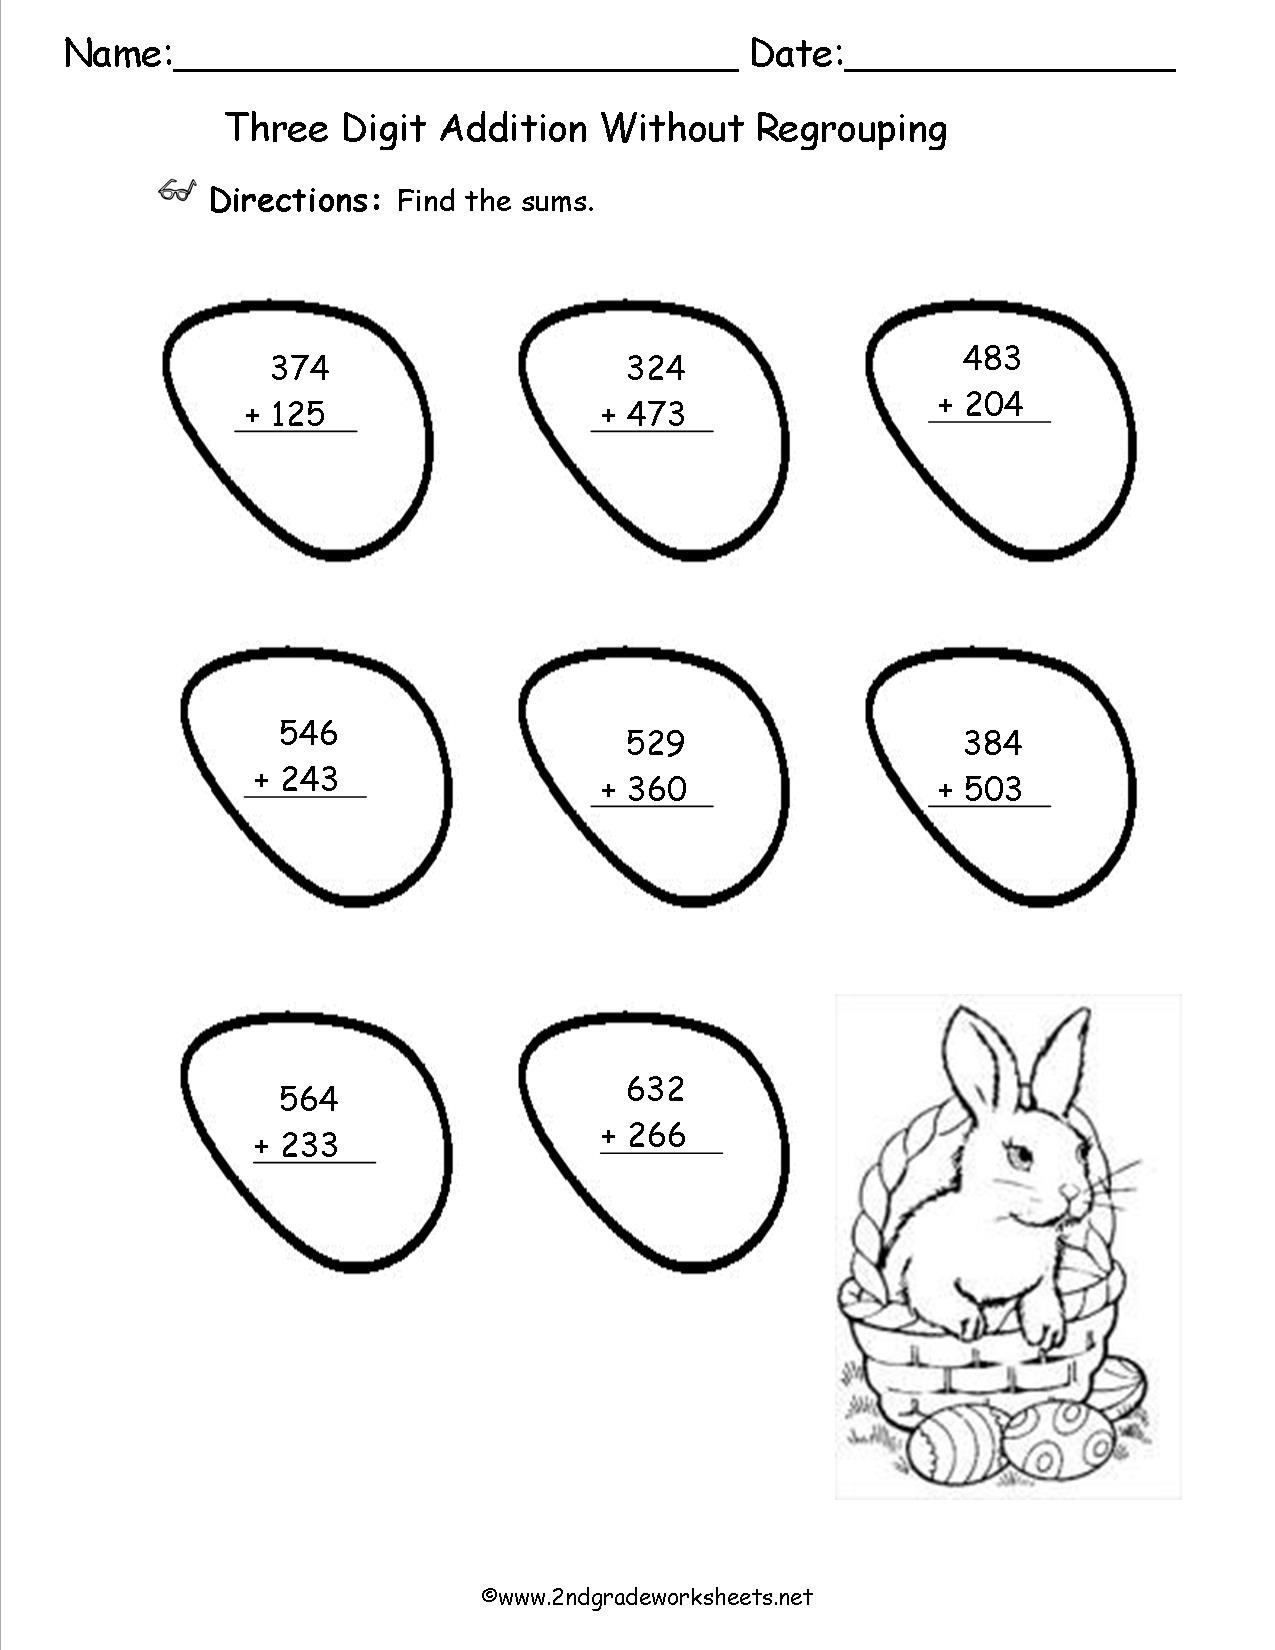 Easter Worksheets And Printouts - Free Printable Easter Worksheets